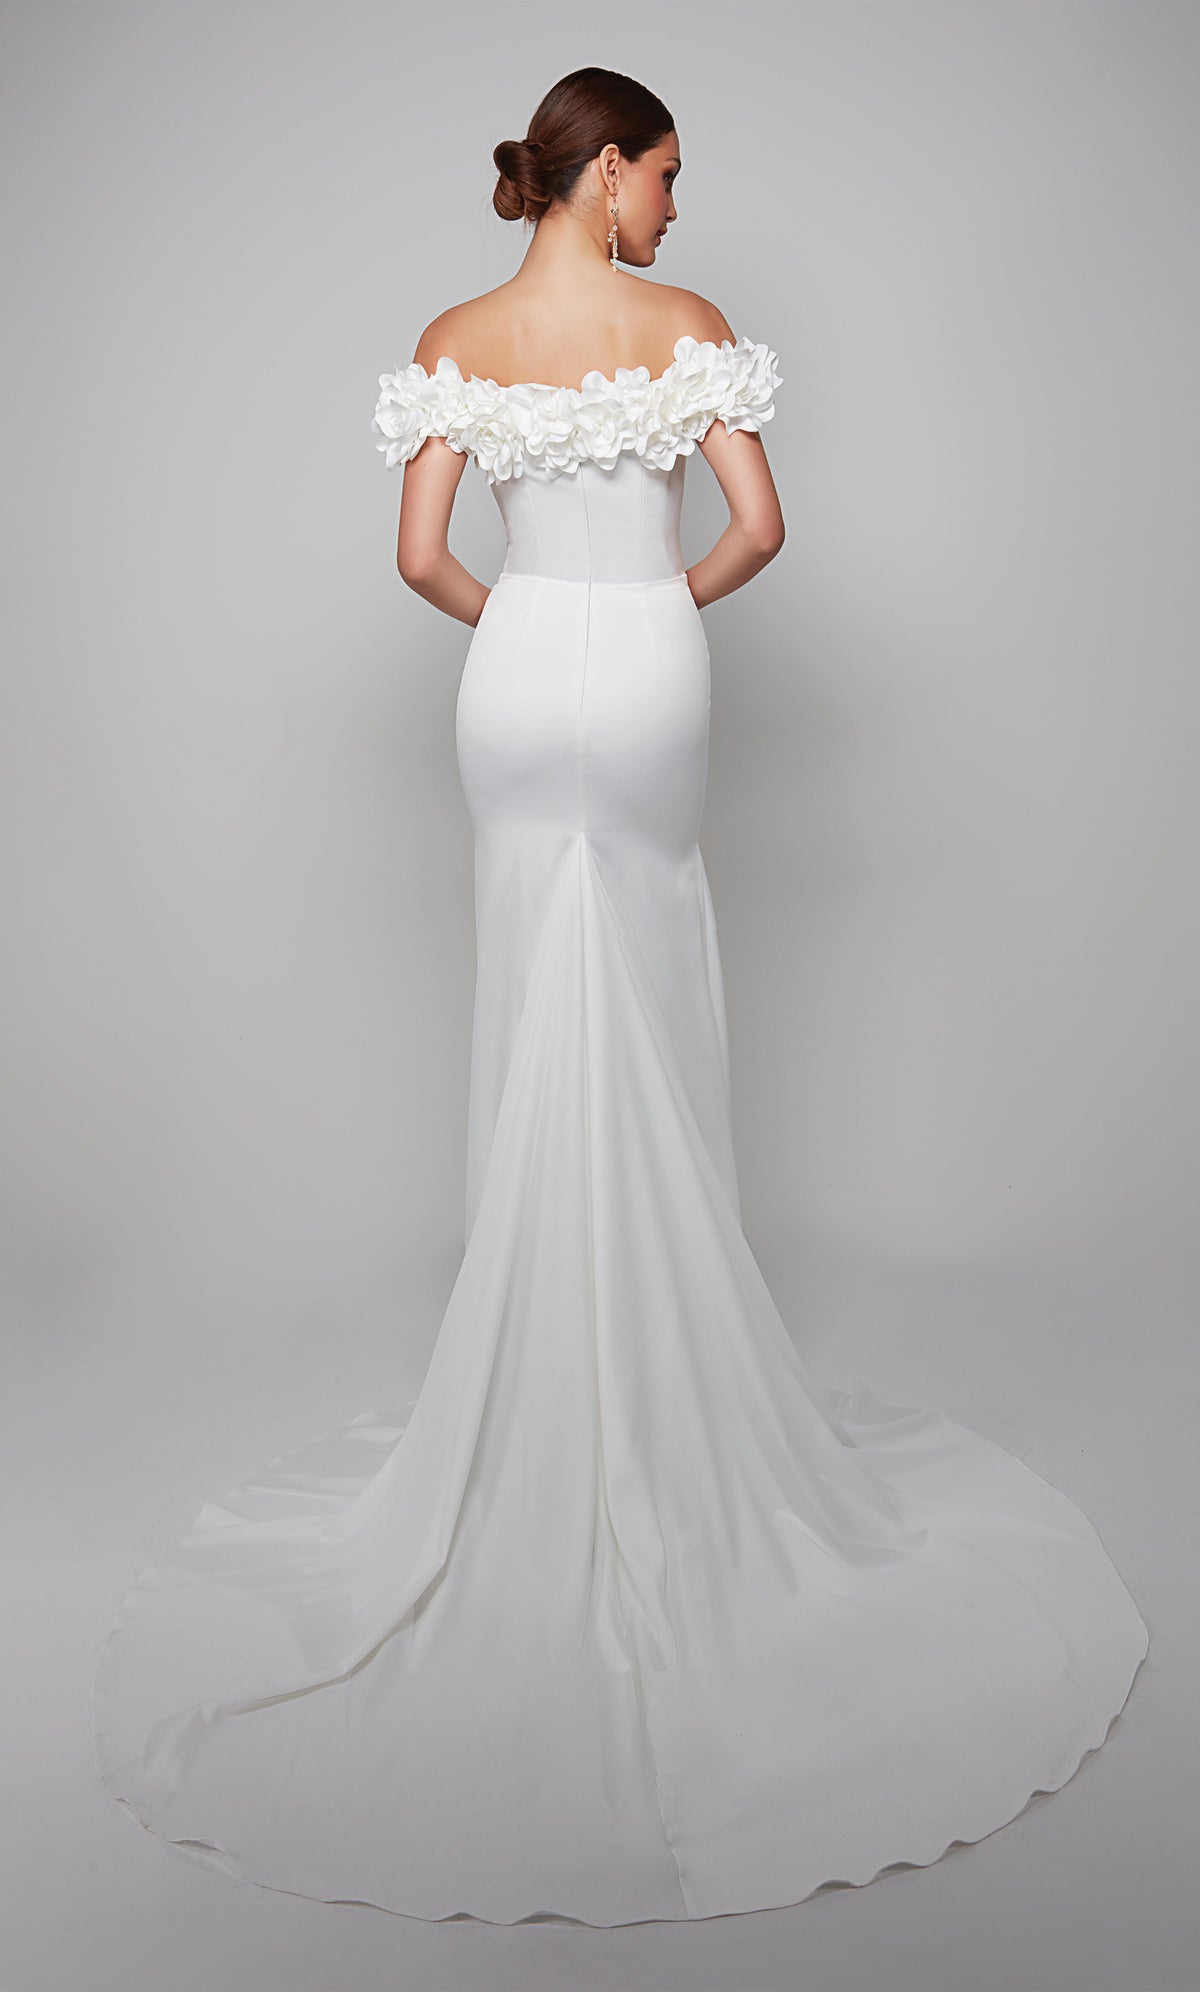 Fit and flare wedding dress featuring an off the shoulder bodice enhanced with a beautiful satin flower voiant and train.